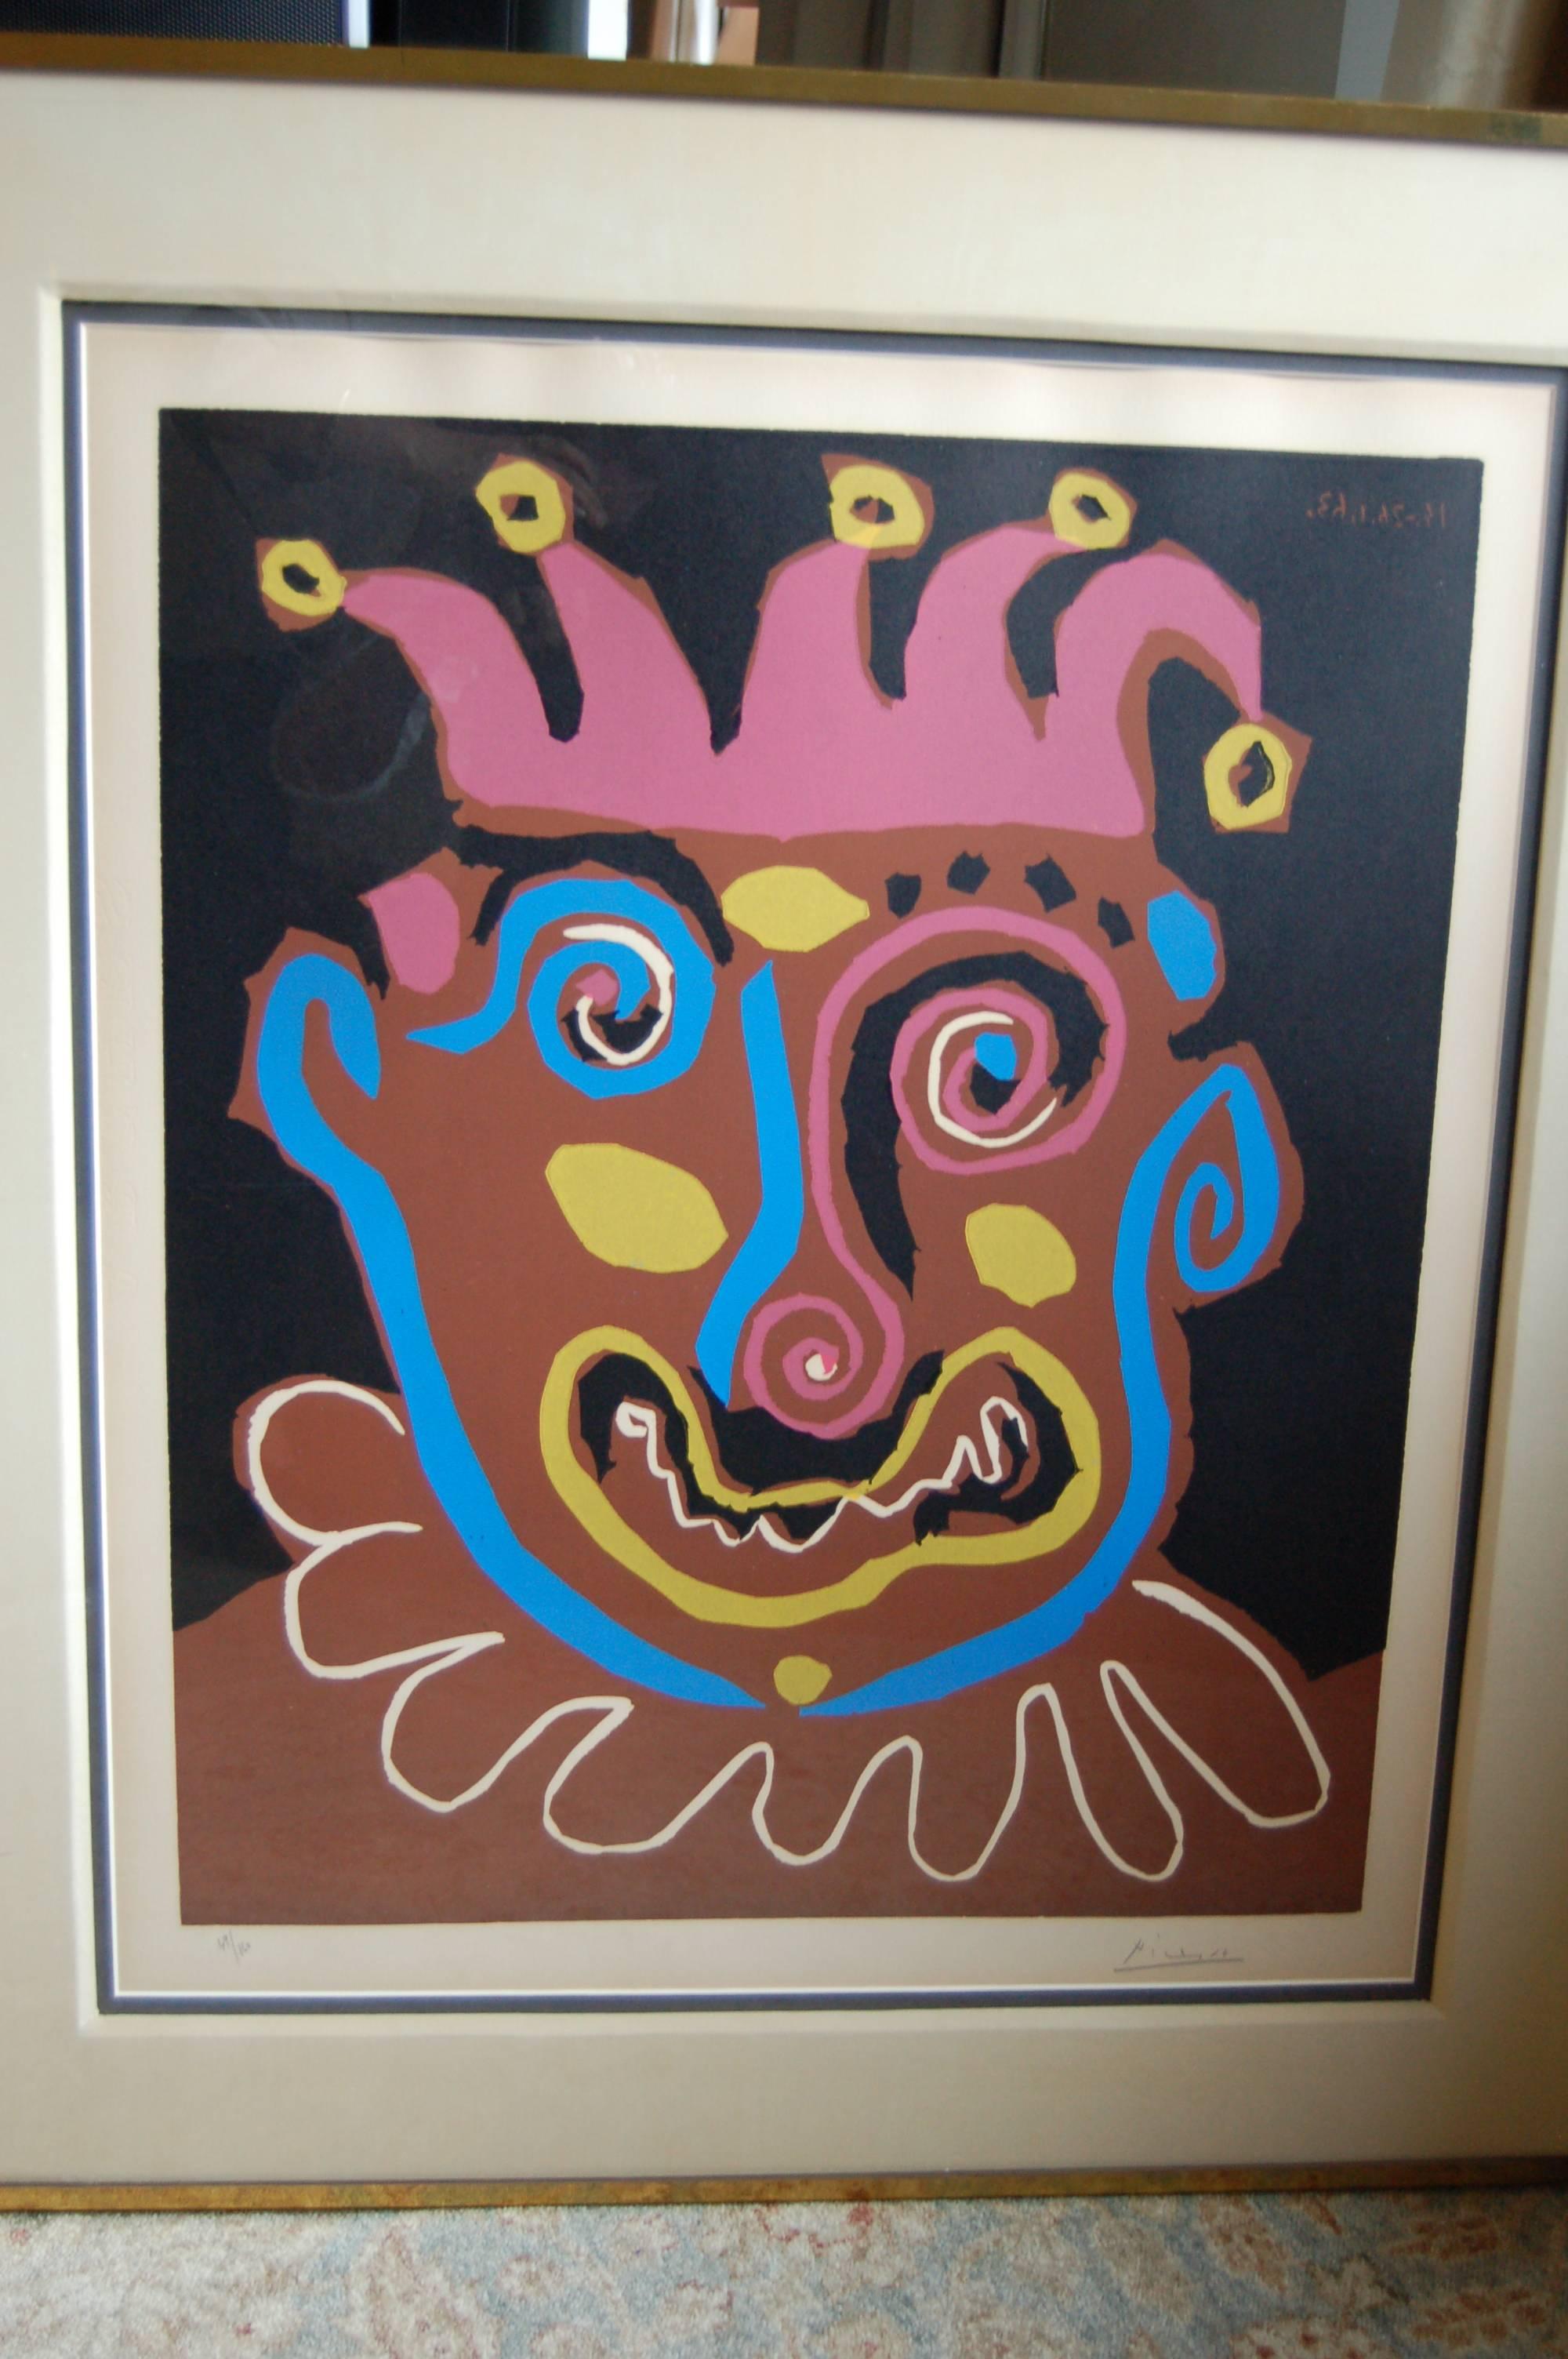 Le Vieux Roi (The Old King)
1963
Linocut printed in colors on Arches wove paper
Edition of 160
25.2 x 20.7 inches (64 x 52.5 cm)
Bloch, 1152
Printed by Arnera, Vallauris, published by Le Patriote
Signed